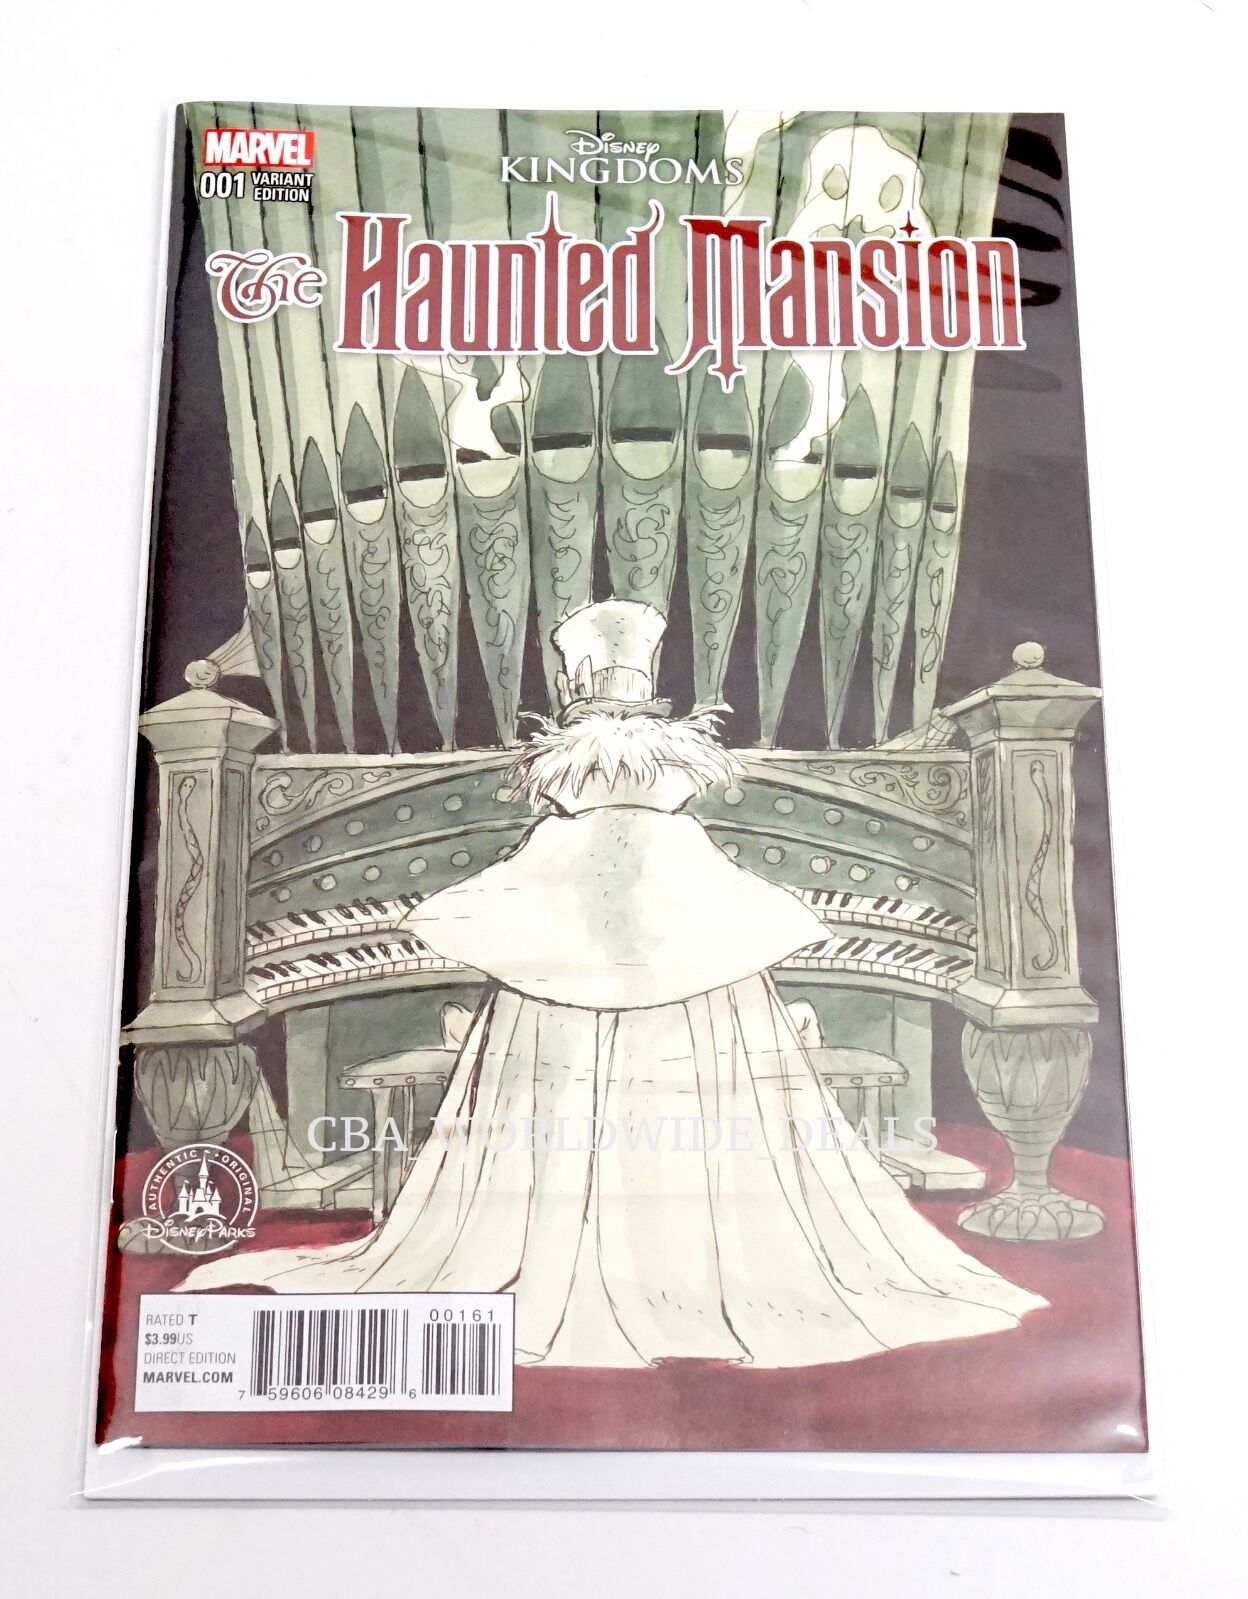 New Marvel Disney Kingdoms The Haunted Mansion #001 Variant Edition Comic Book